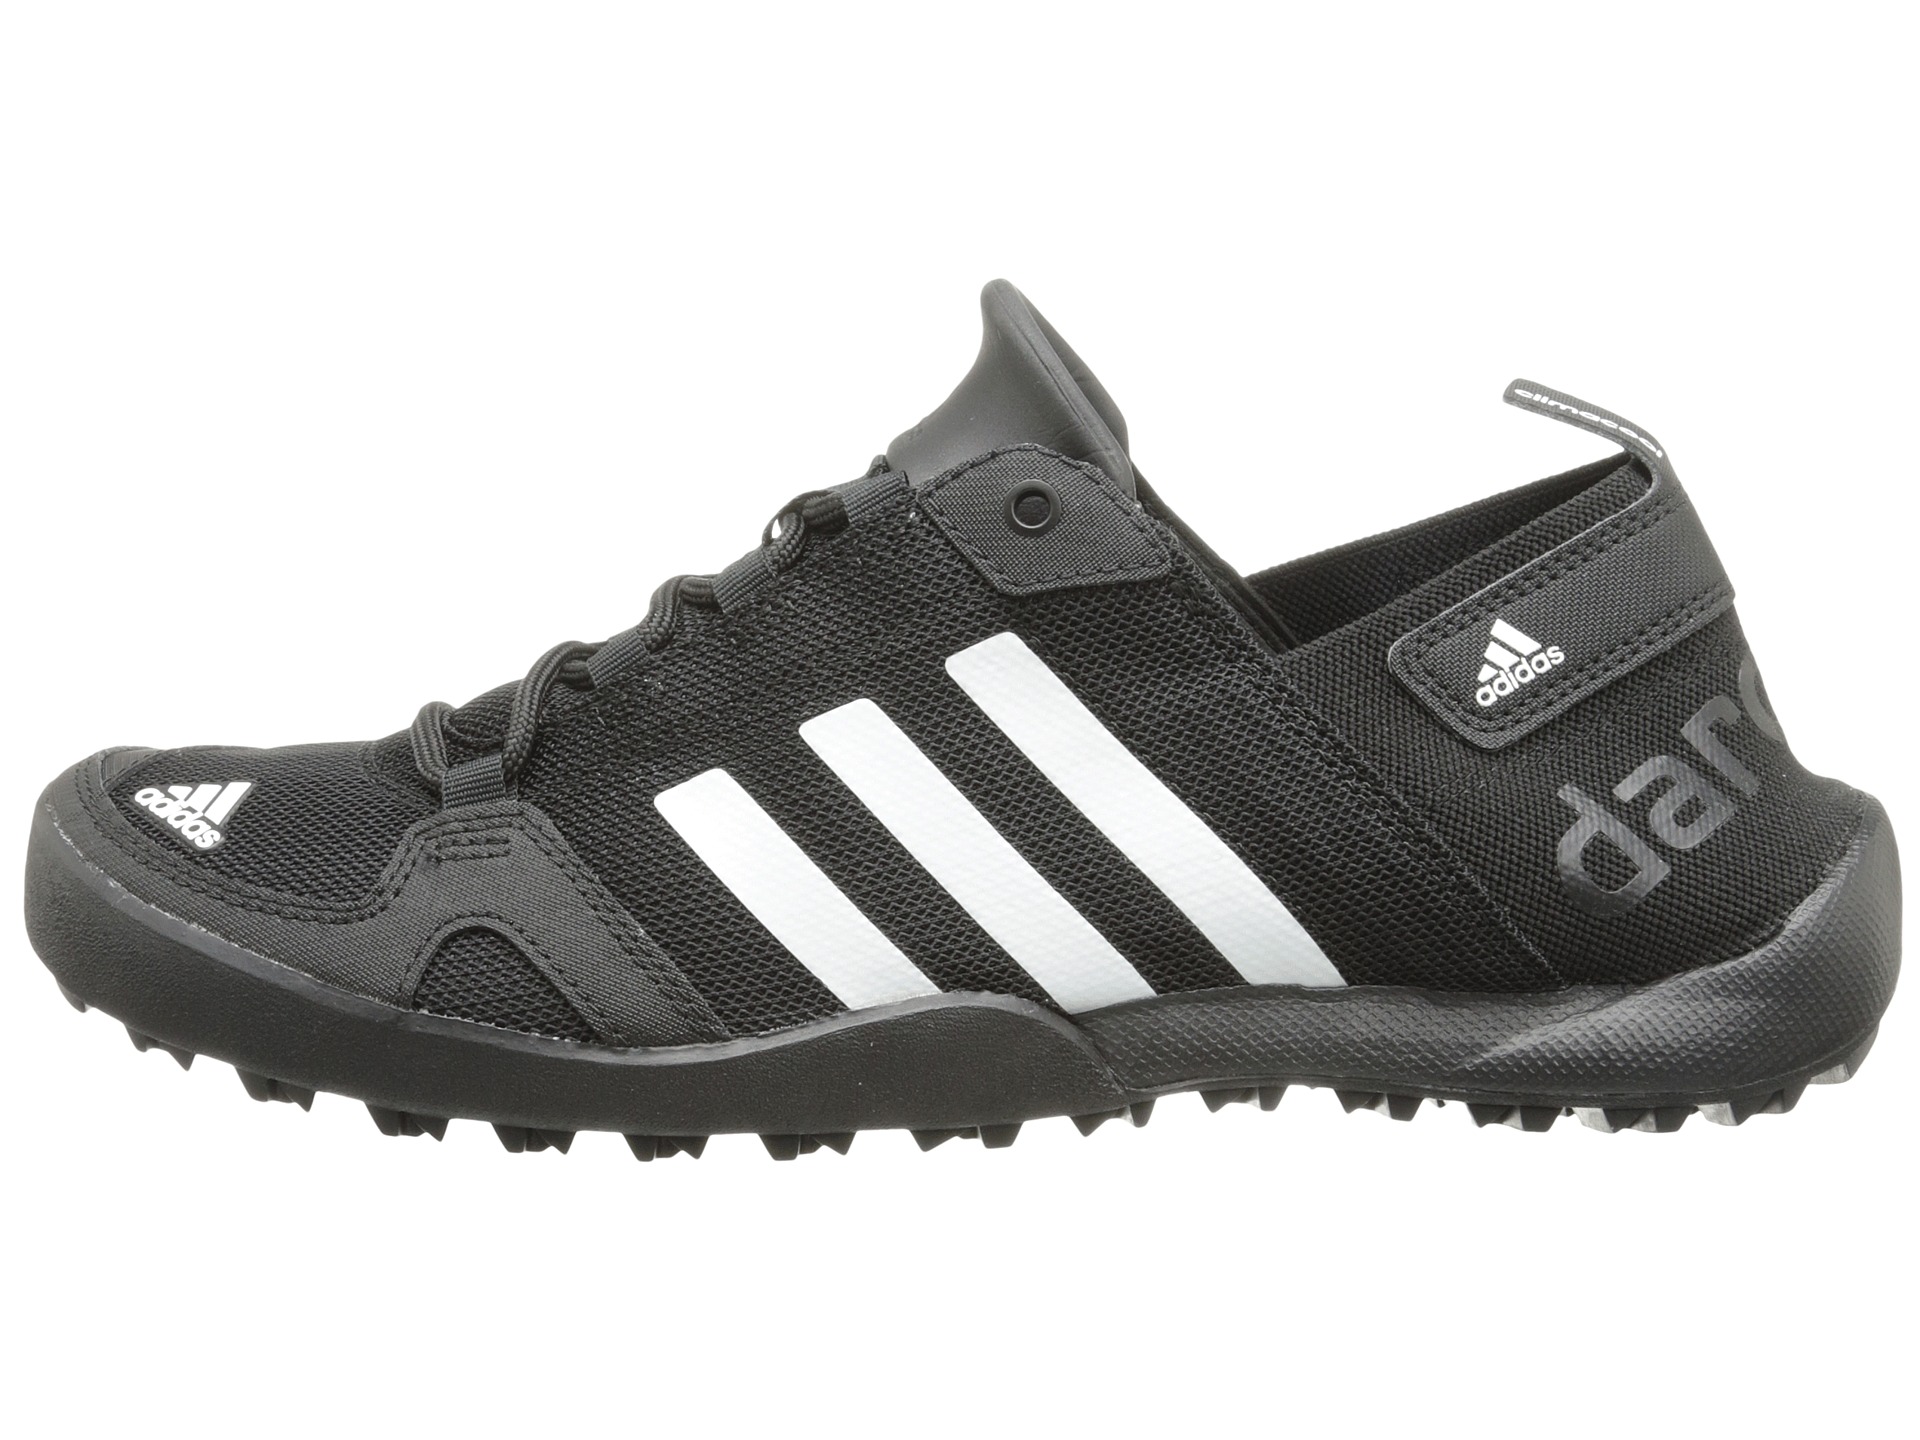 Adidas Outdoor Climacool Daroga Two | Shipped Free at Zappos